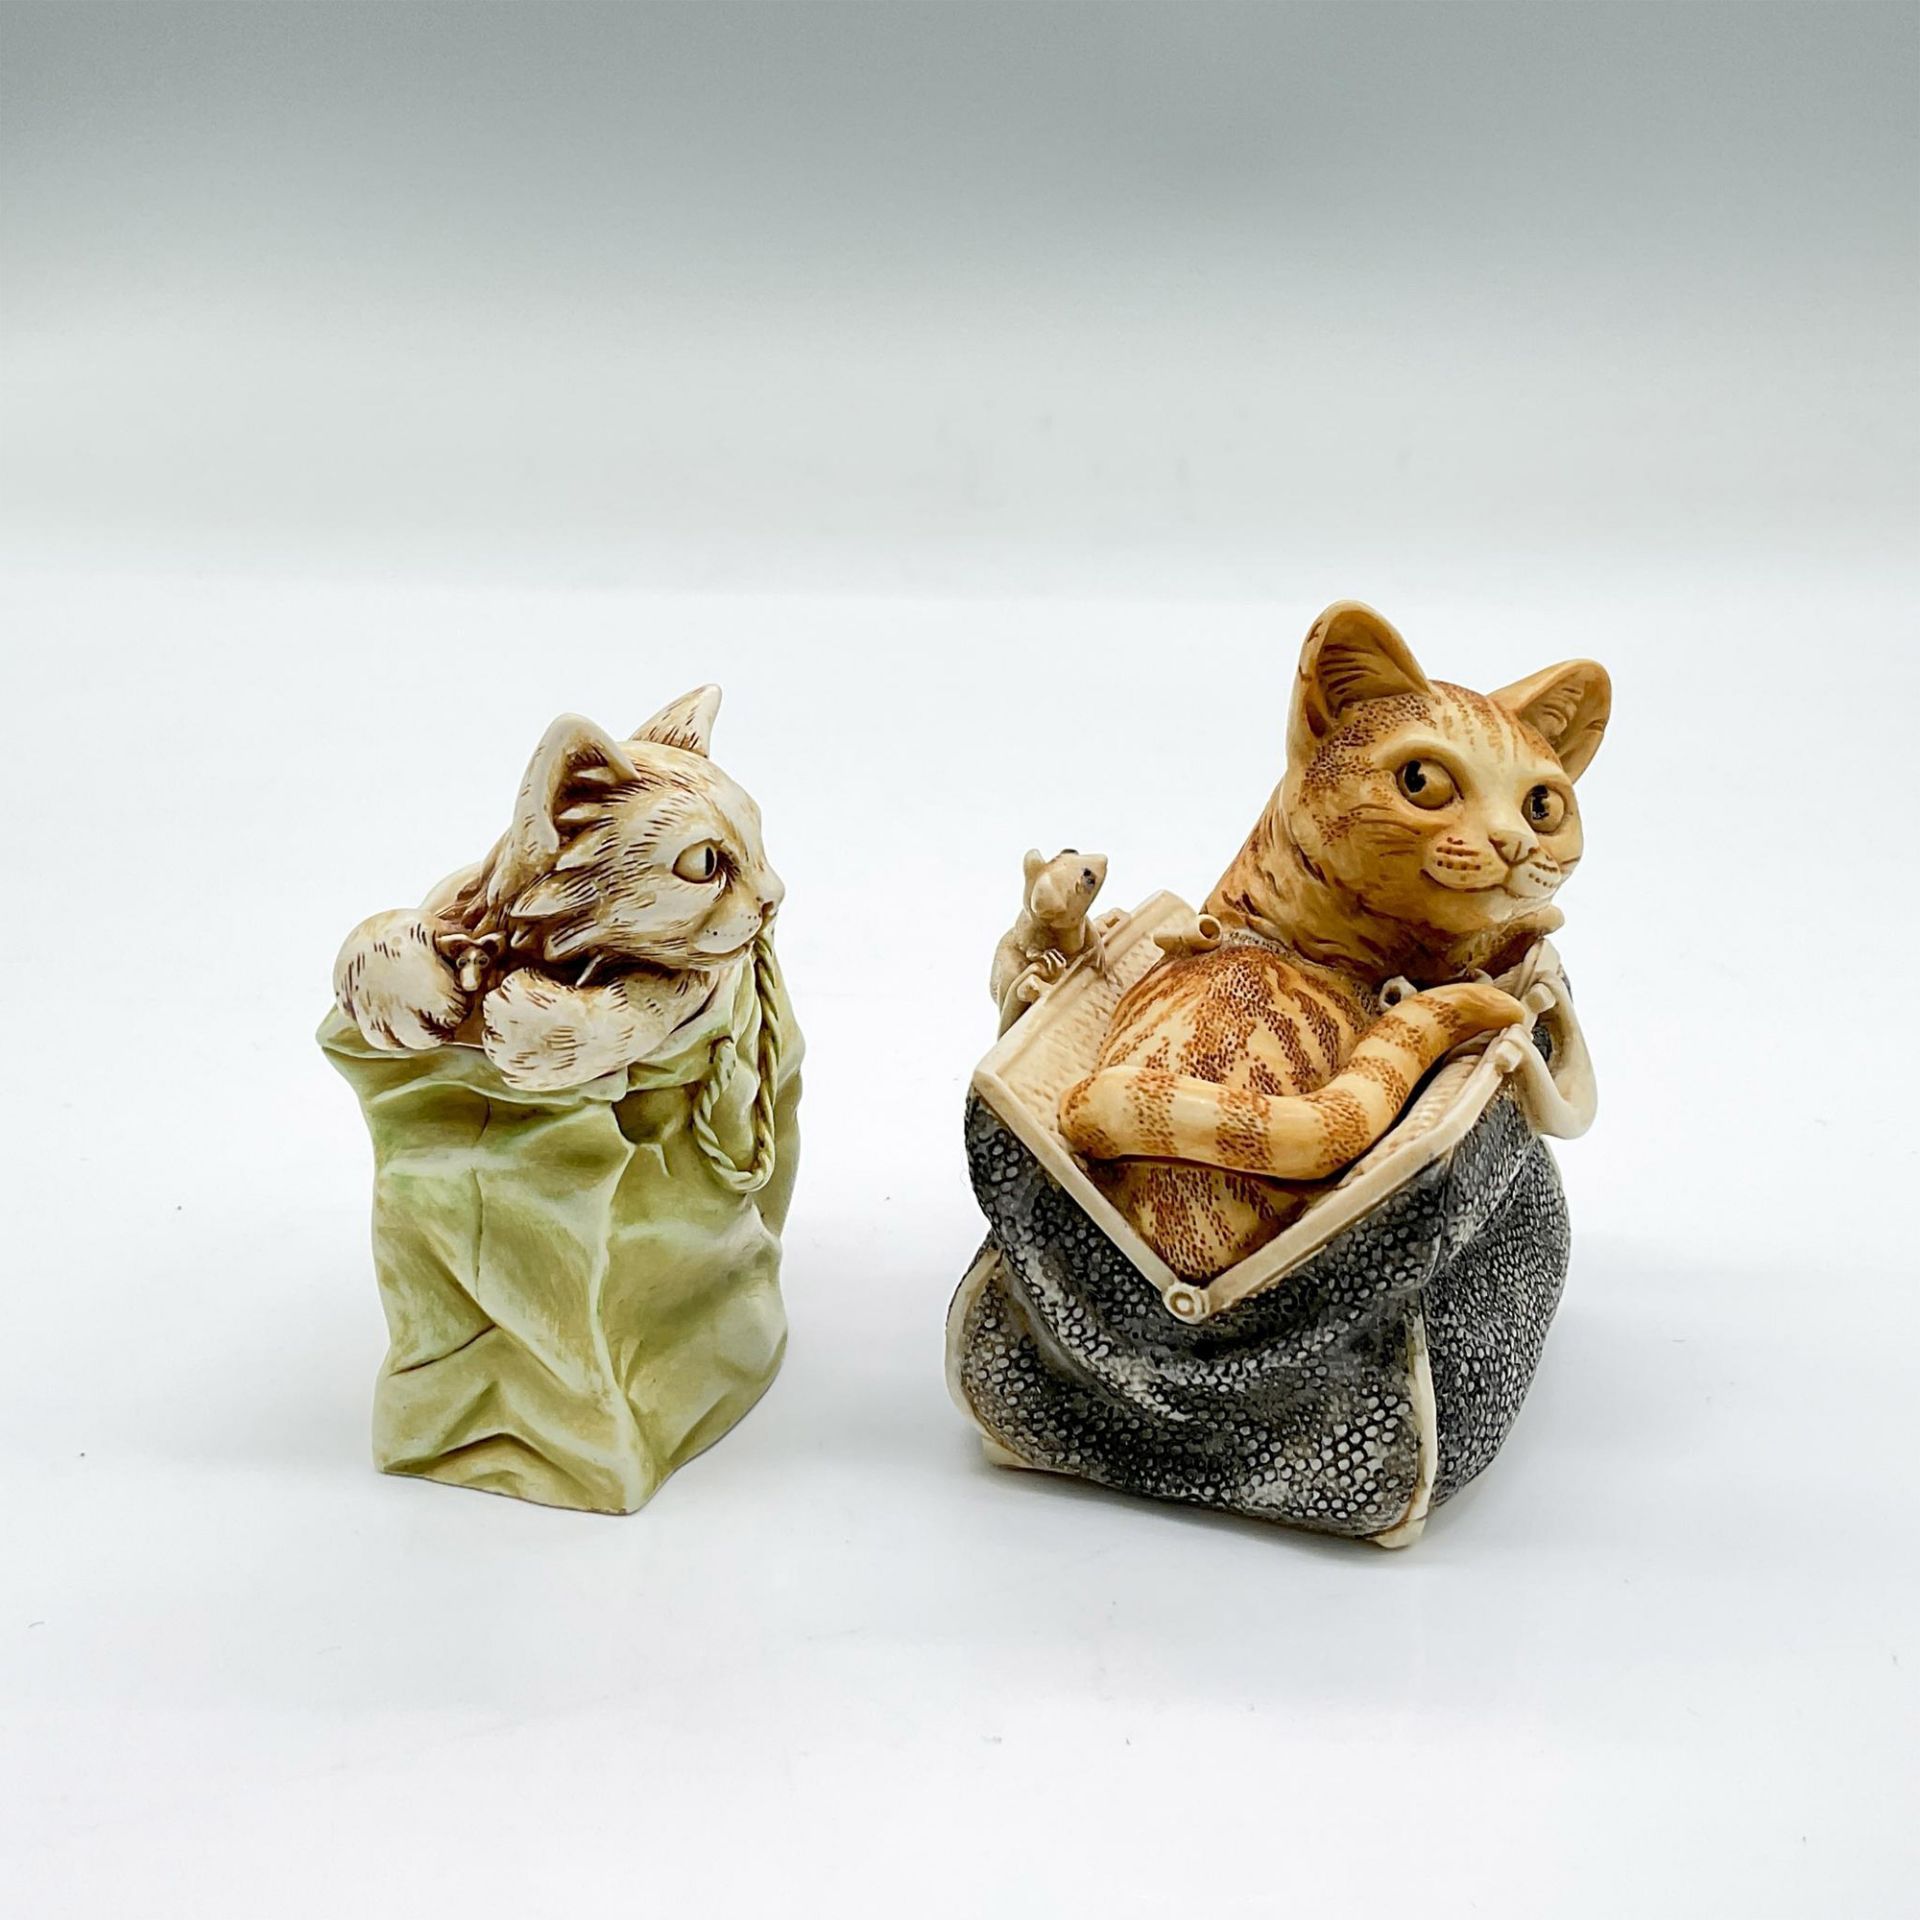 2pc Harmony Kingdom Treasure Boxes, Cats in Bags - Image 2 of 5